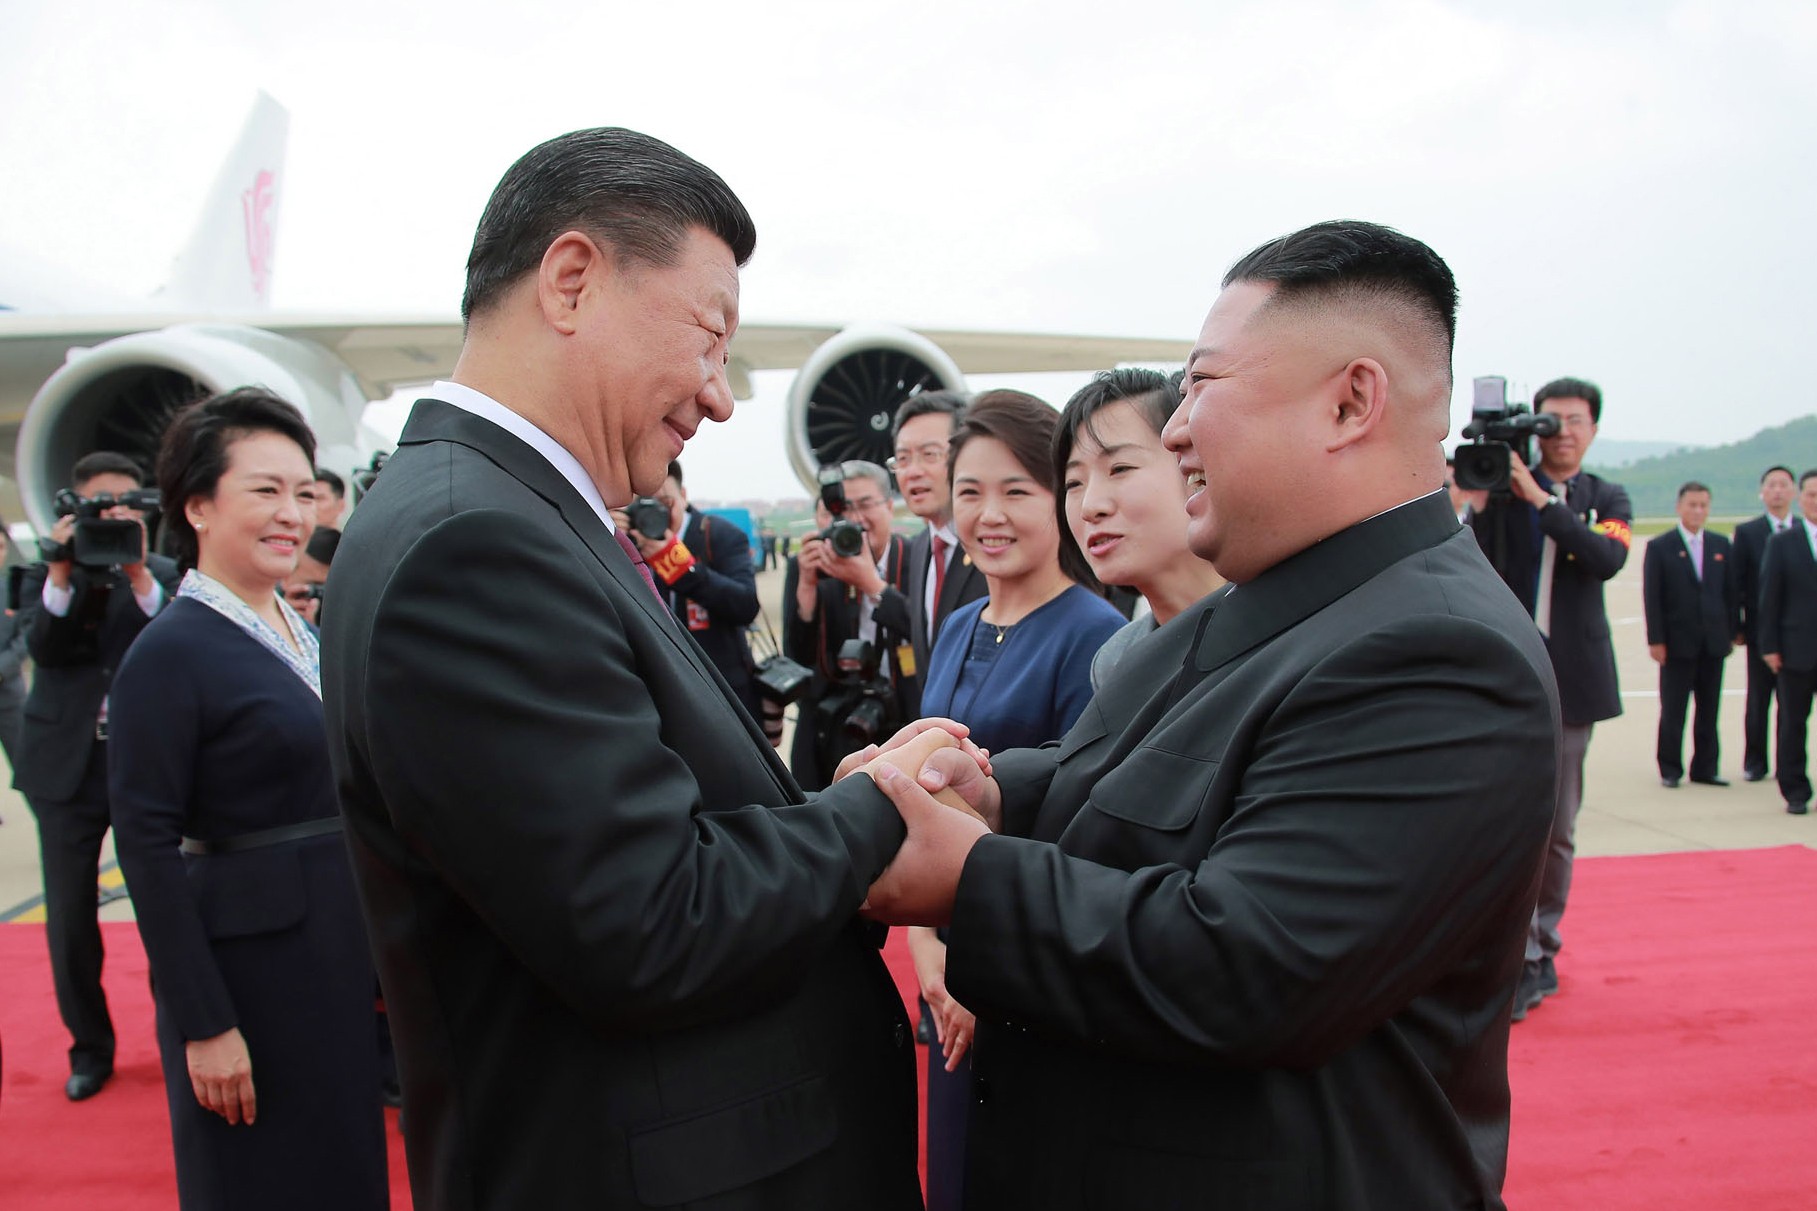 Chinese President Xi Jinping and North Korean leader Kim Jong-un made a clear statement of their friendship in Pyongyang. Photo: AFP